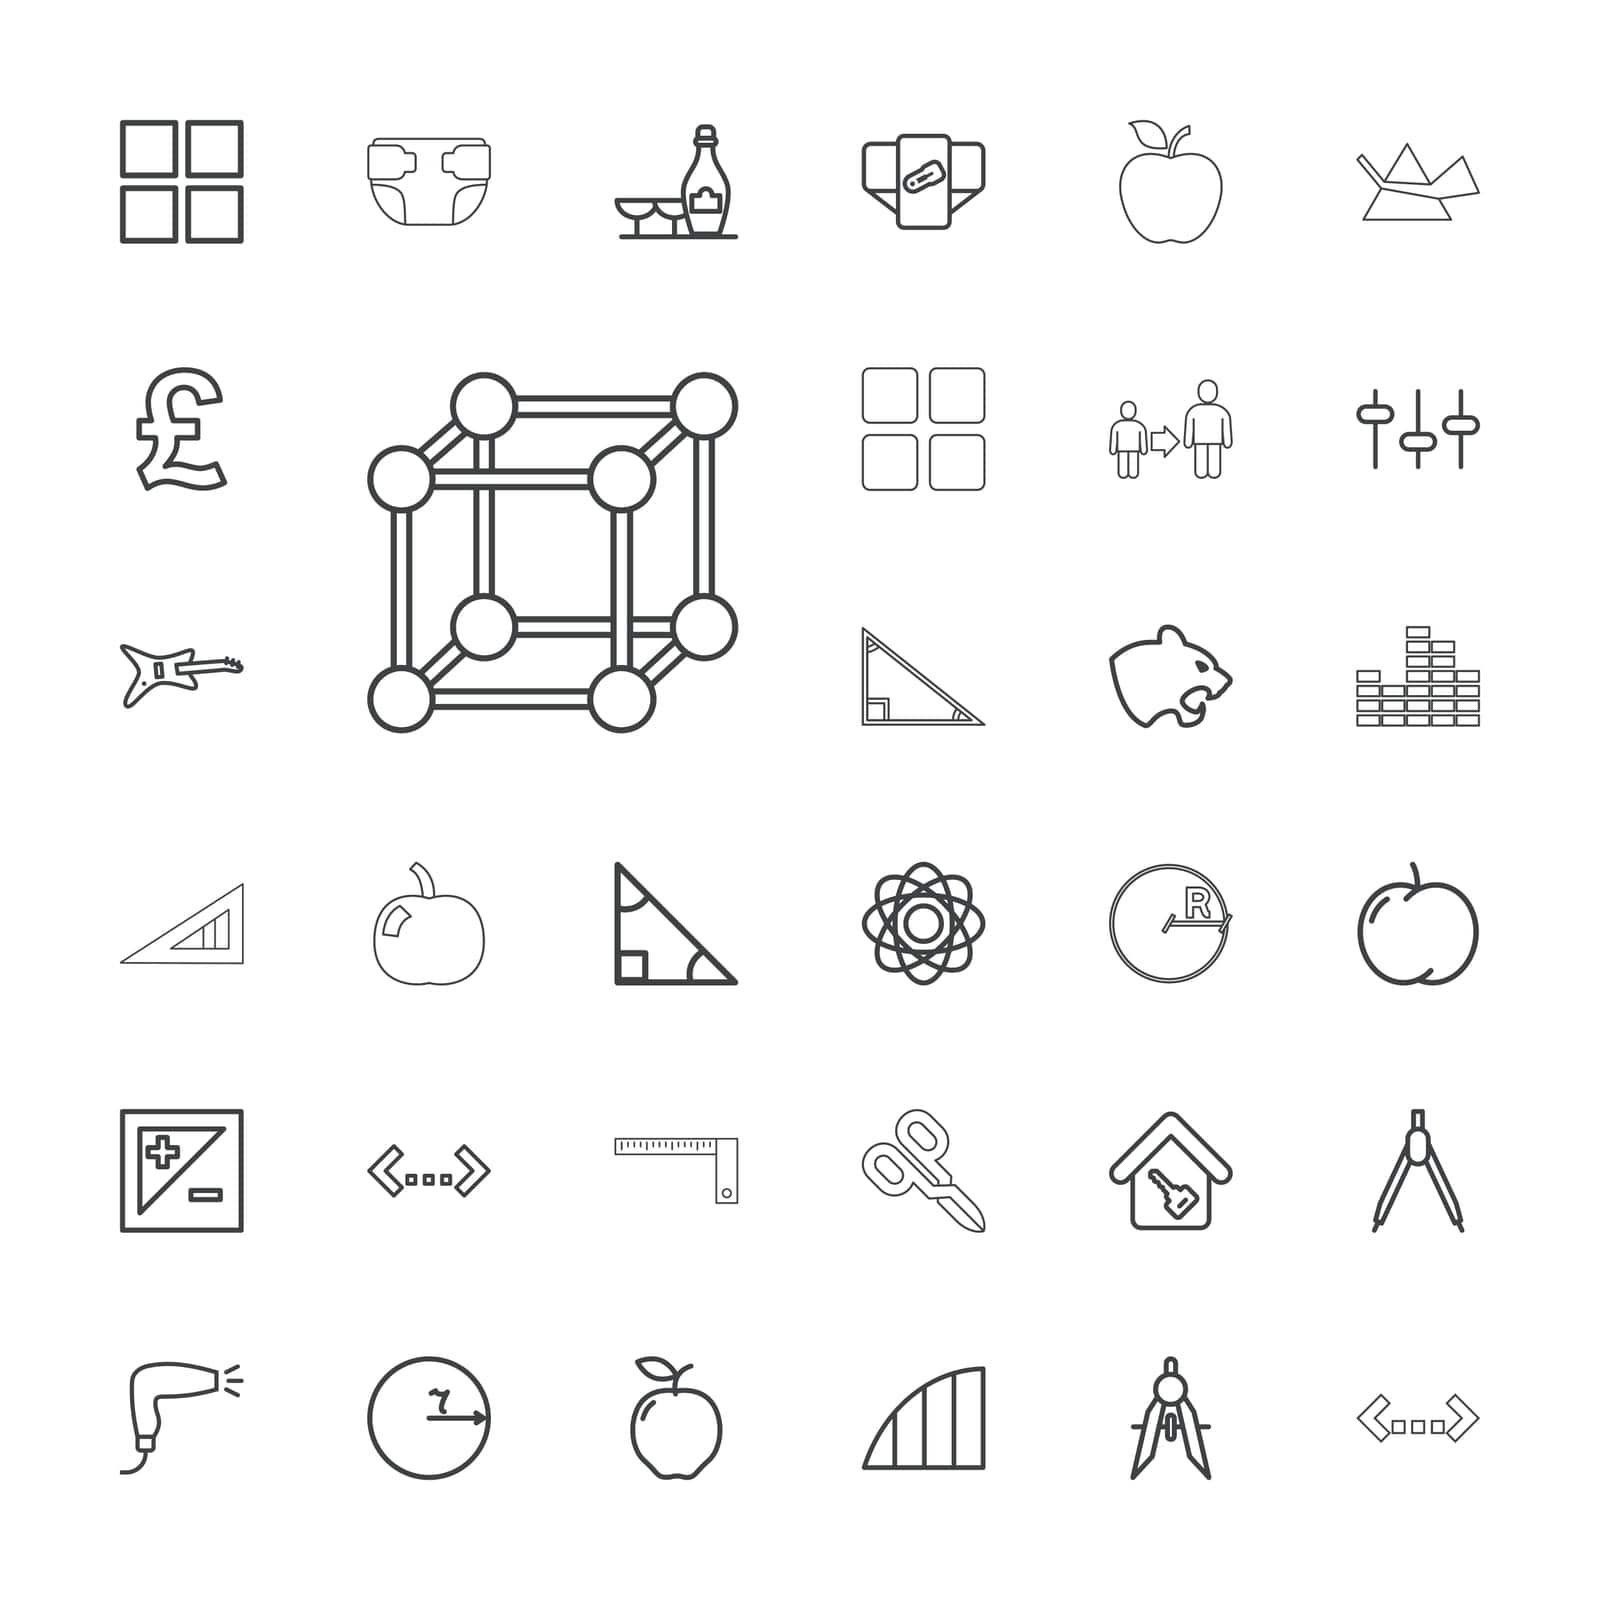 symbol,father,concept,icon,sign,isolated,ruler,triangle,glasses,apple,hair,pound,son,white,equalizer,and,intersection,champagne,angle,vector,cube,key,set,shape,dryer,home,guitar,scissors,exposure,light,compass,background,geometric,panther,illustration,diaper,circle,manicure,atom,quotation,wine